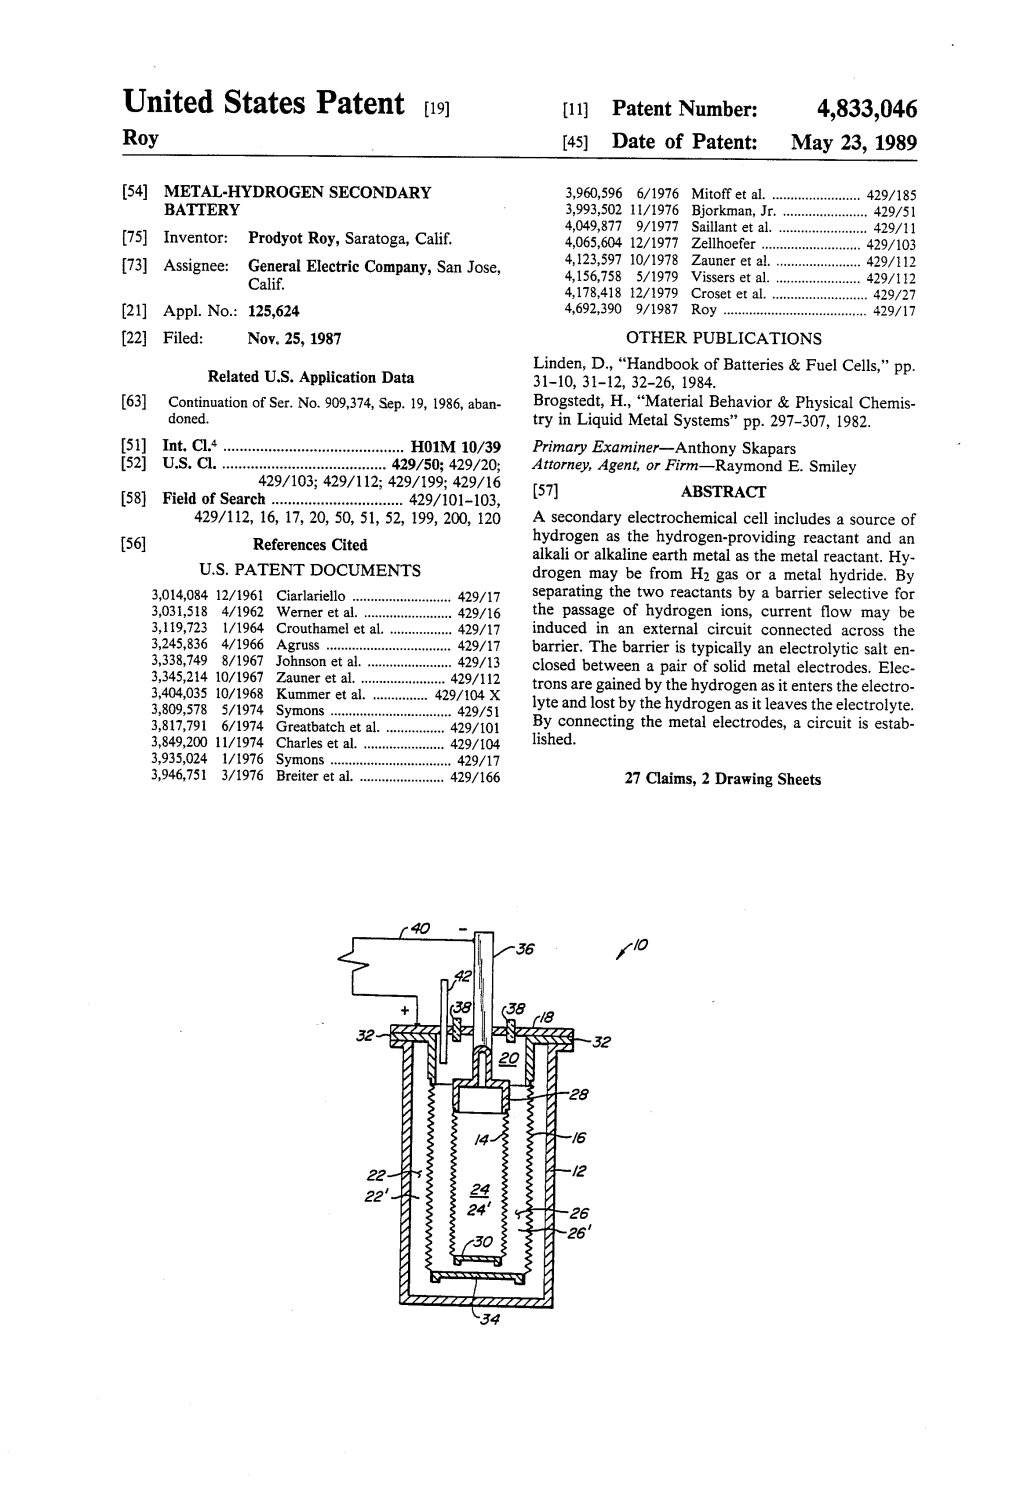 United States Patent (19) 11 Patent Number: 4,833,046 Roy (45) Date of Patent: May 23, 1989